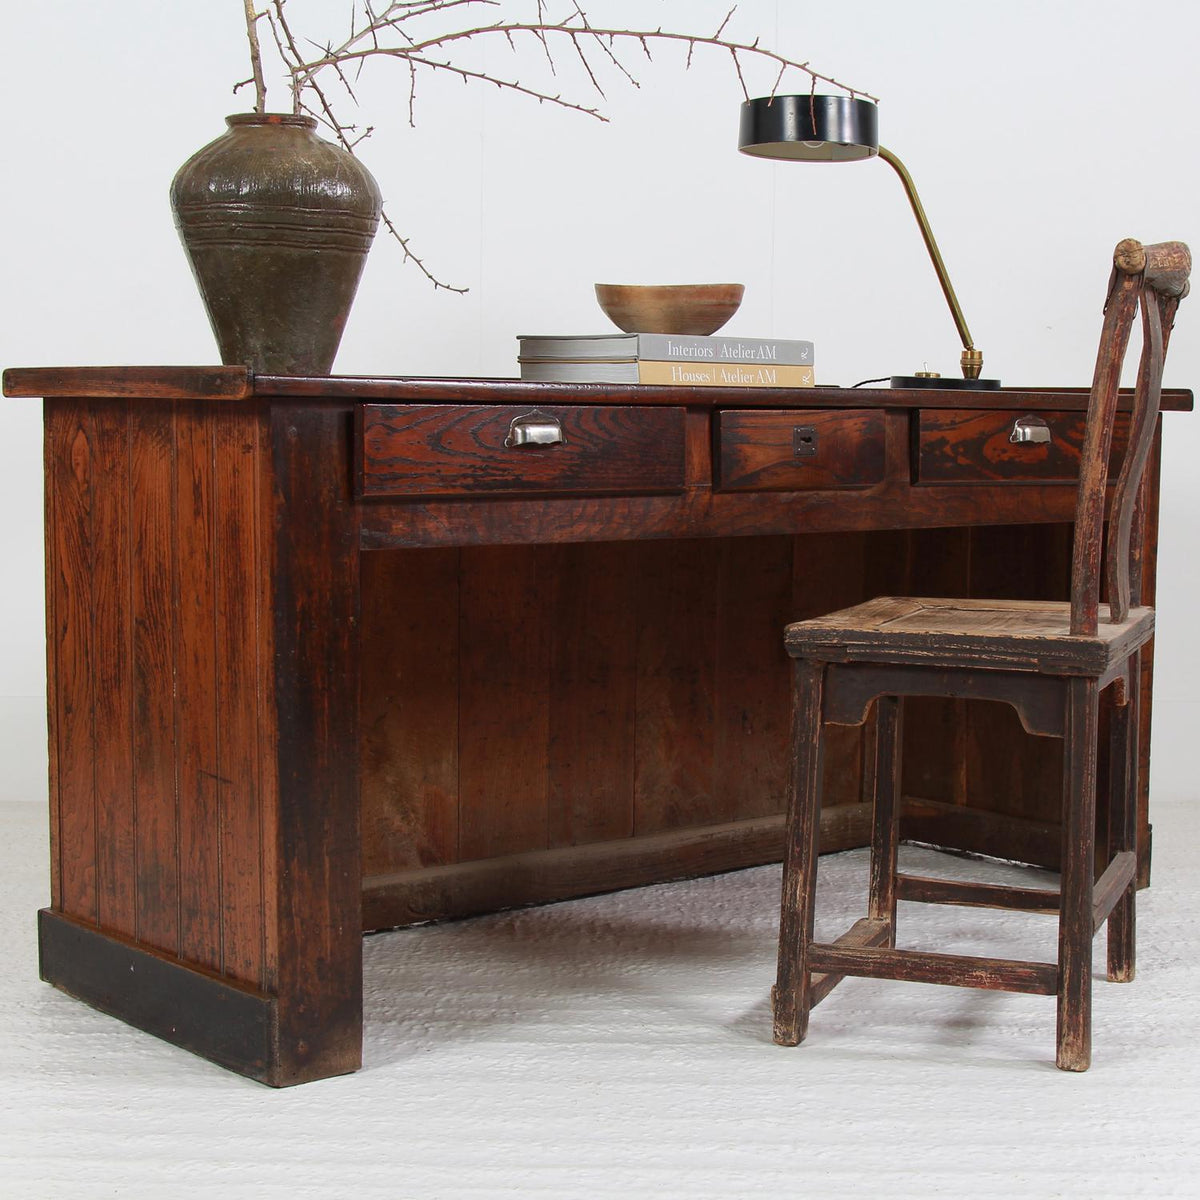 Unique French 20thC Coffee Shop Counter Sourced From Provence